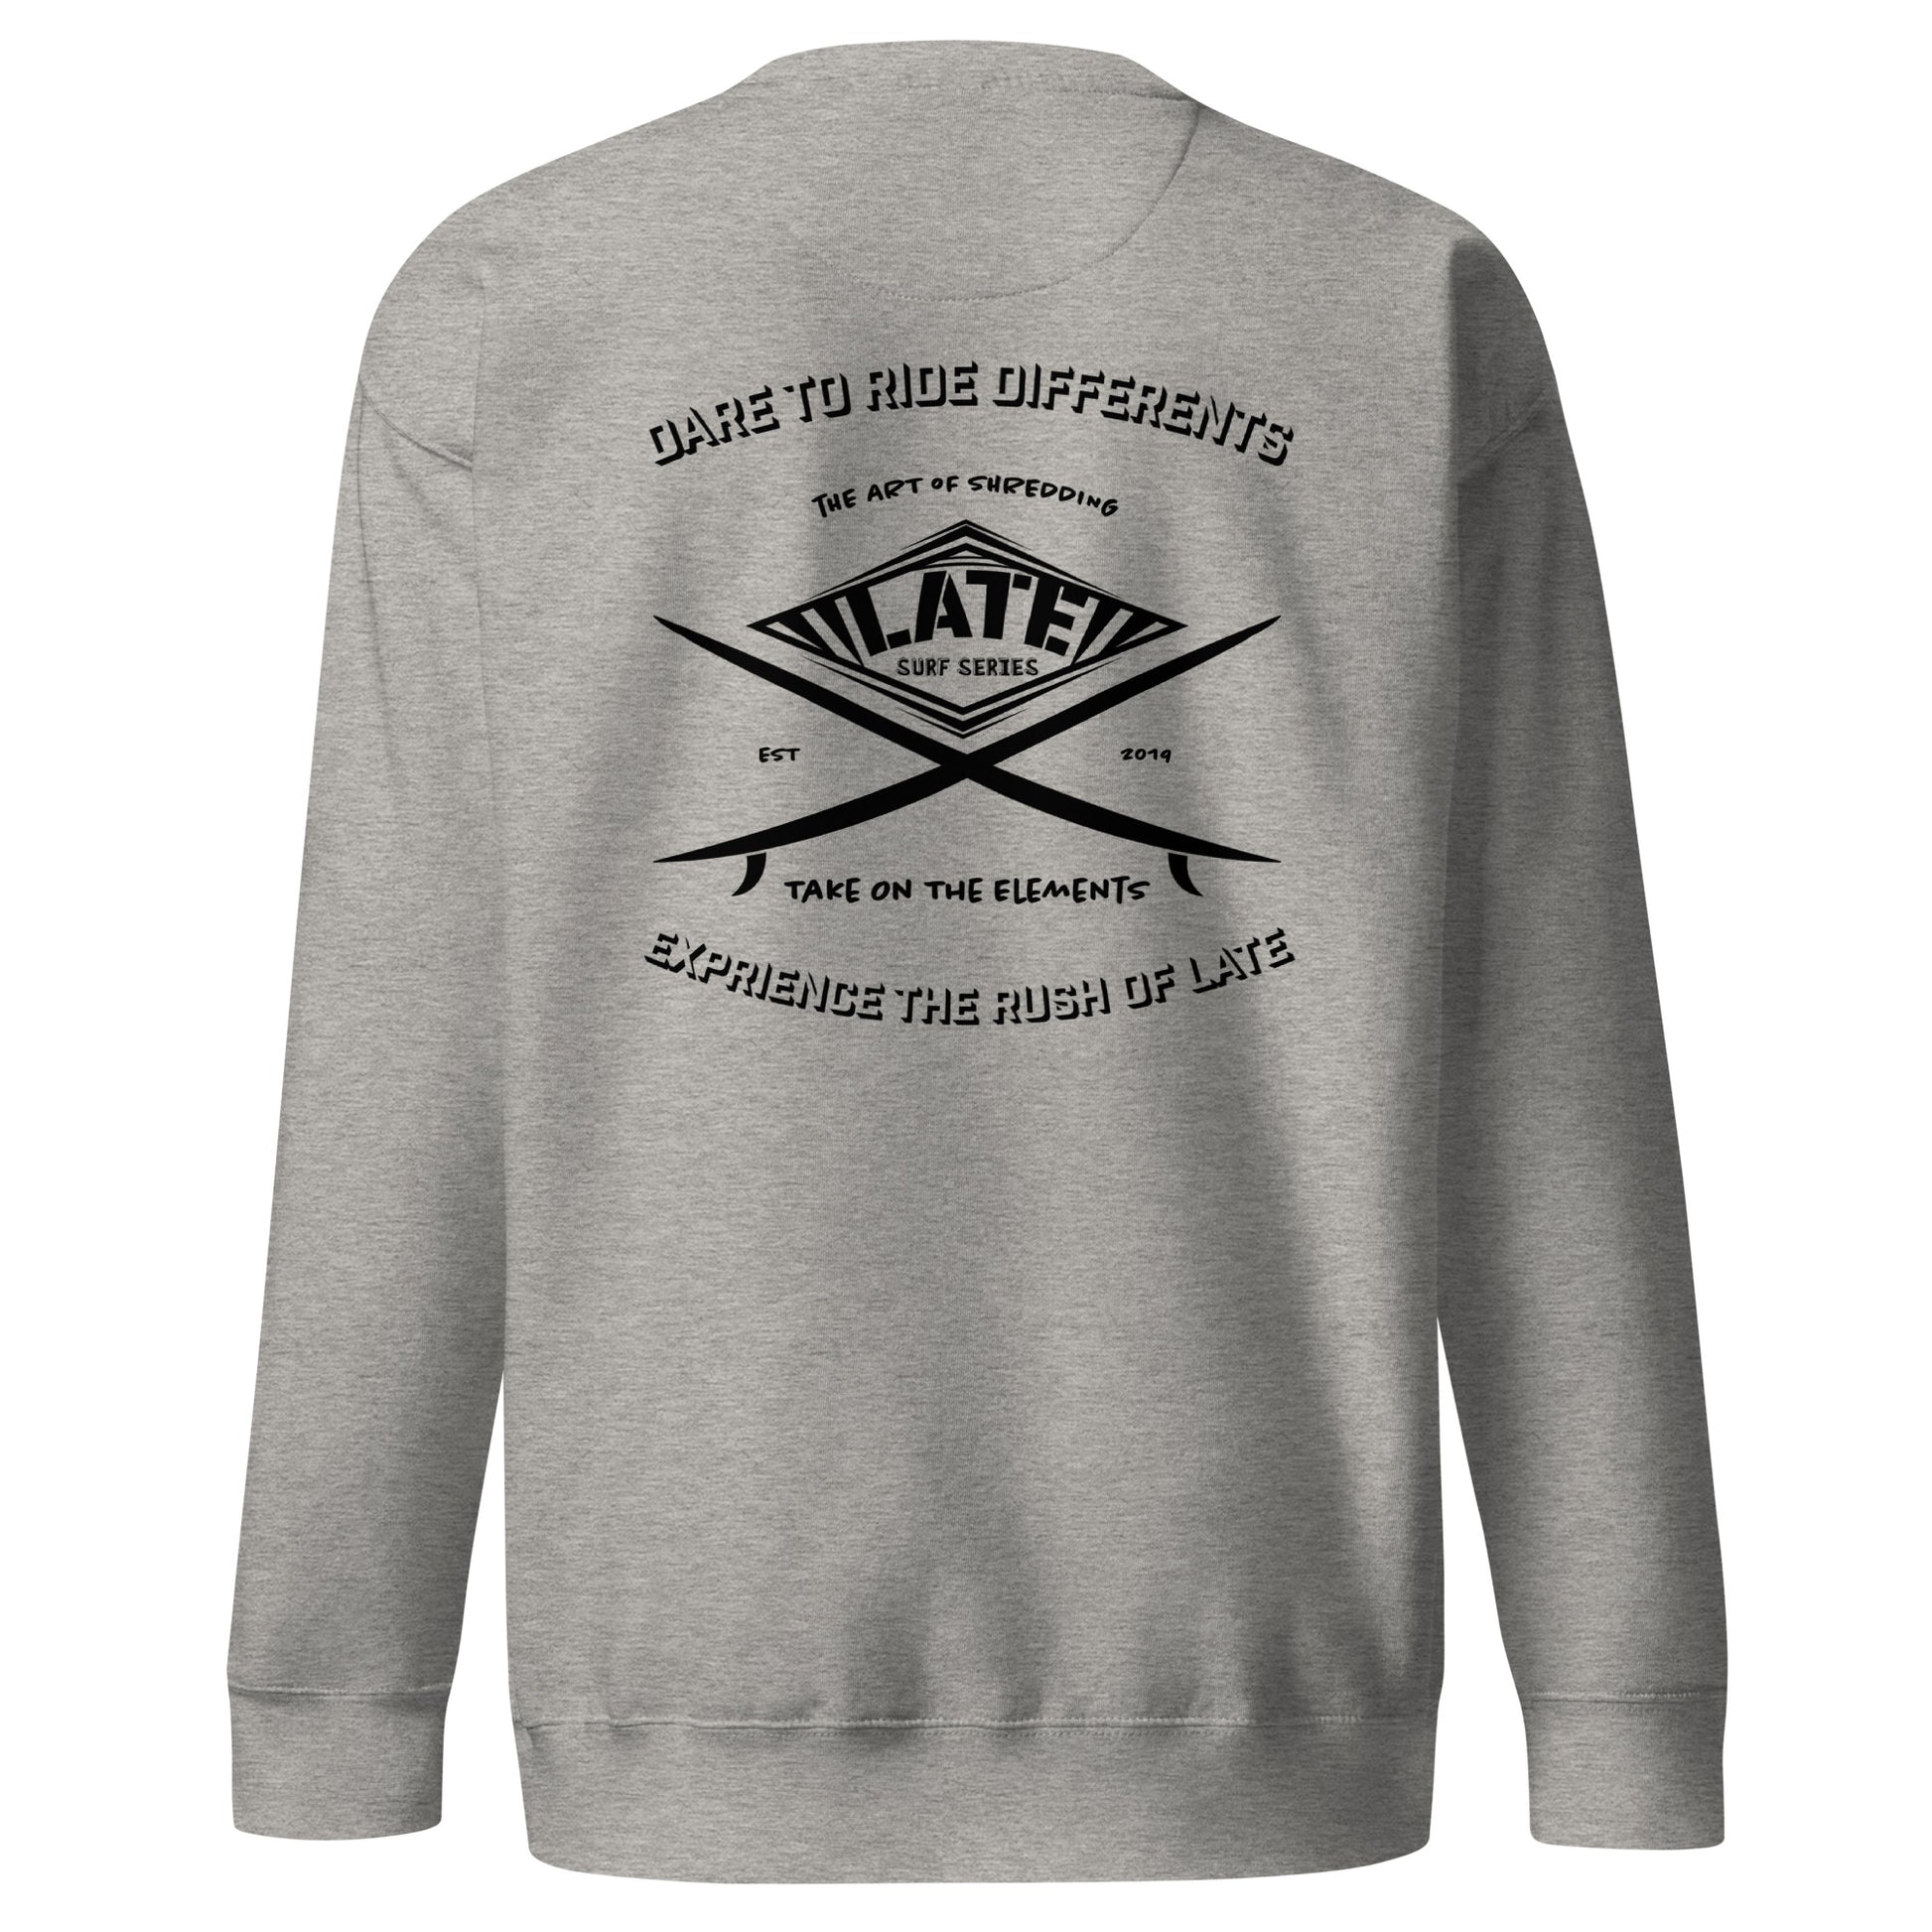 Sweatshirt surfboard dare to ride differents Take On The Elements experience the rush with Late de dos unisex couleur gris